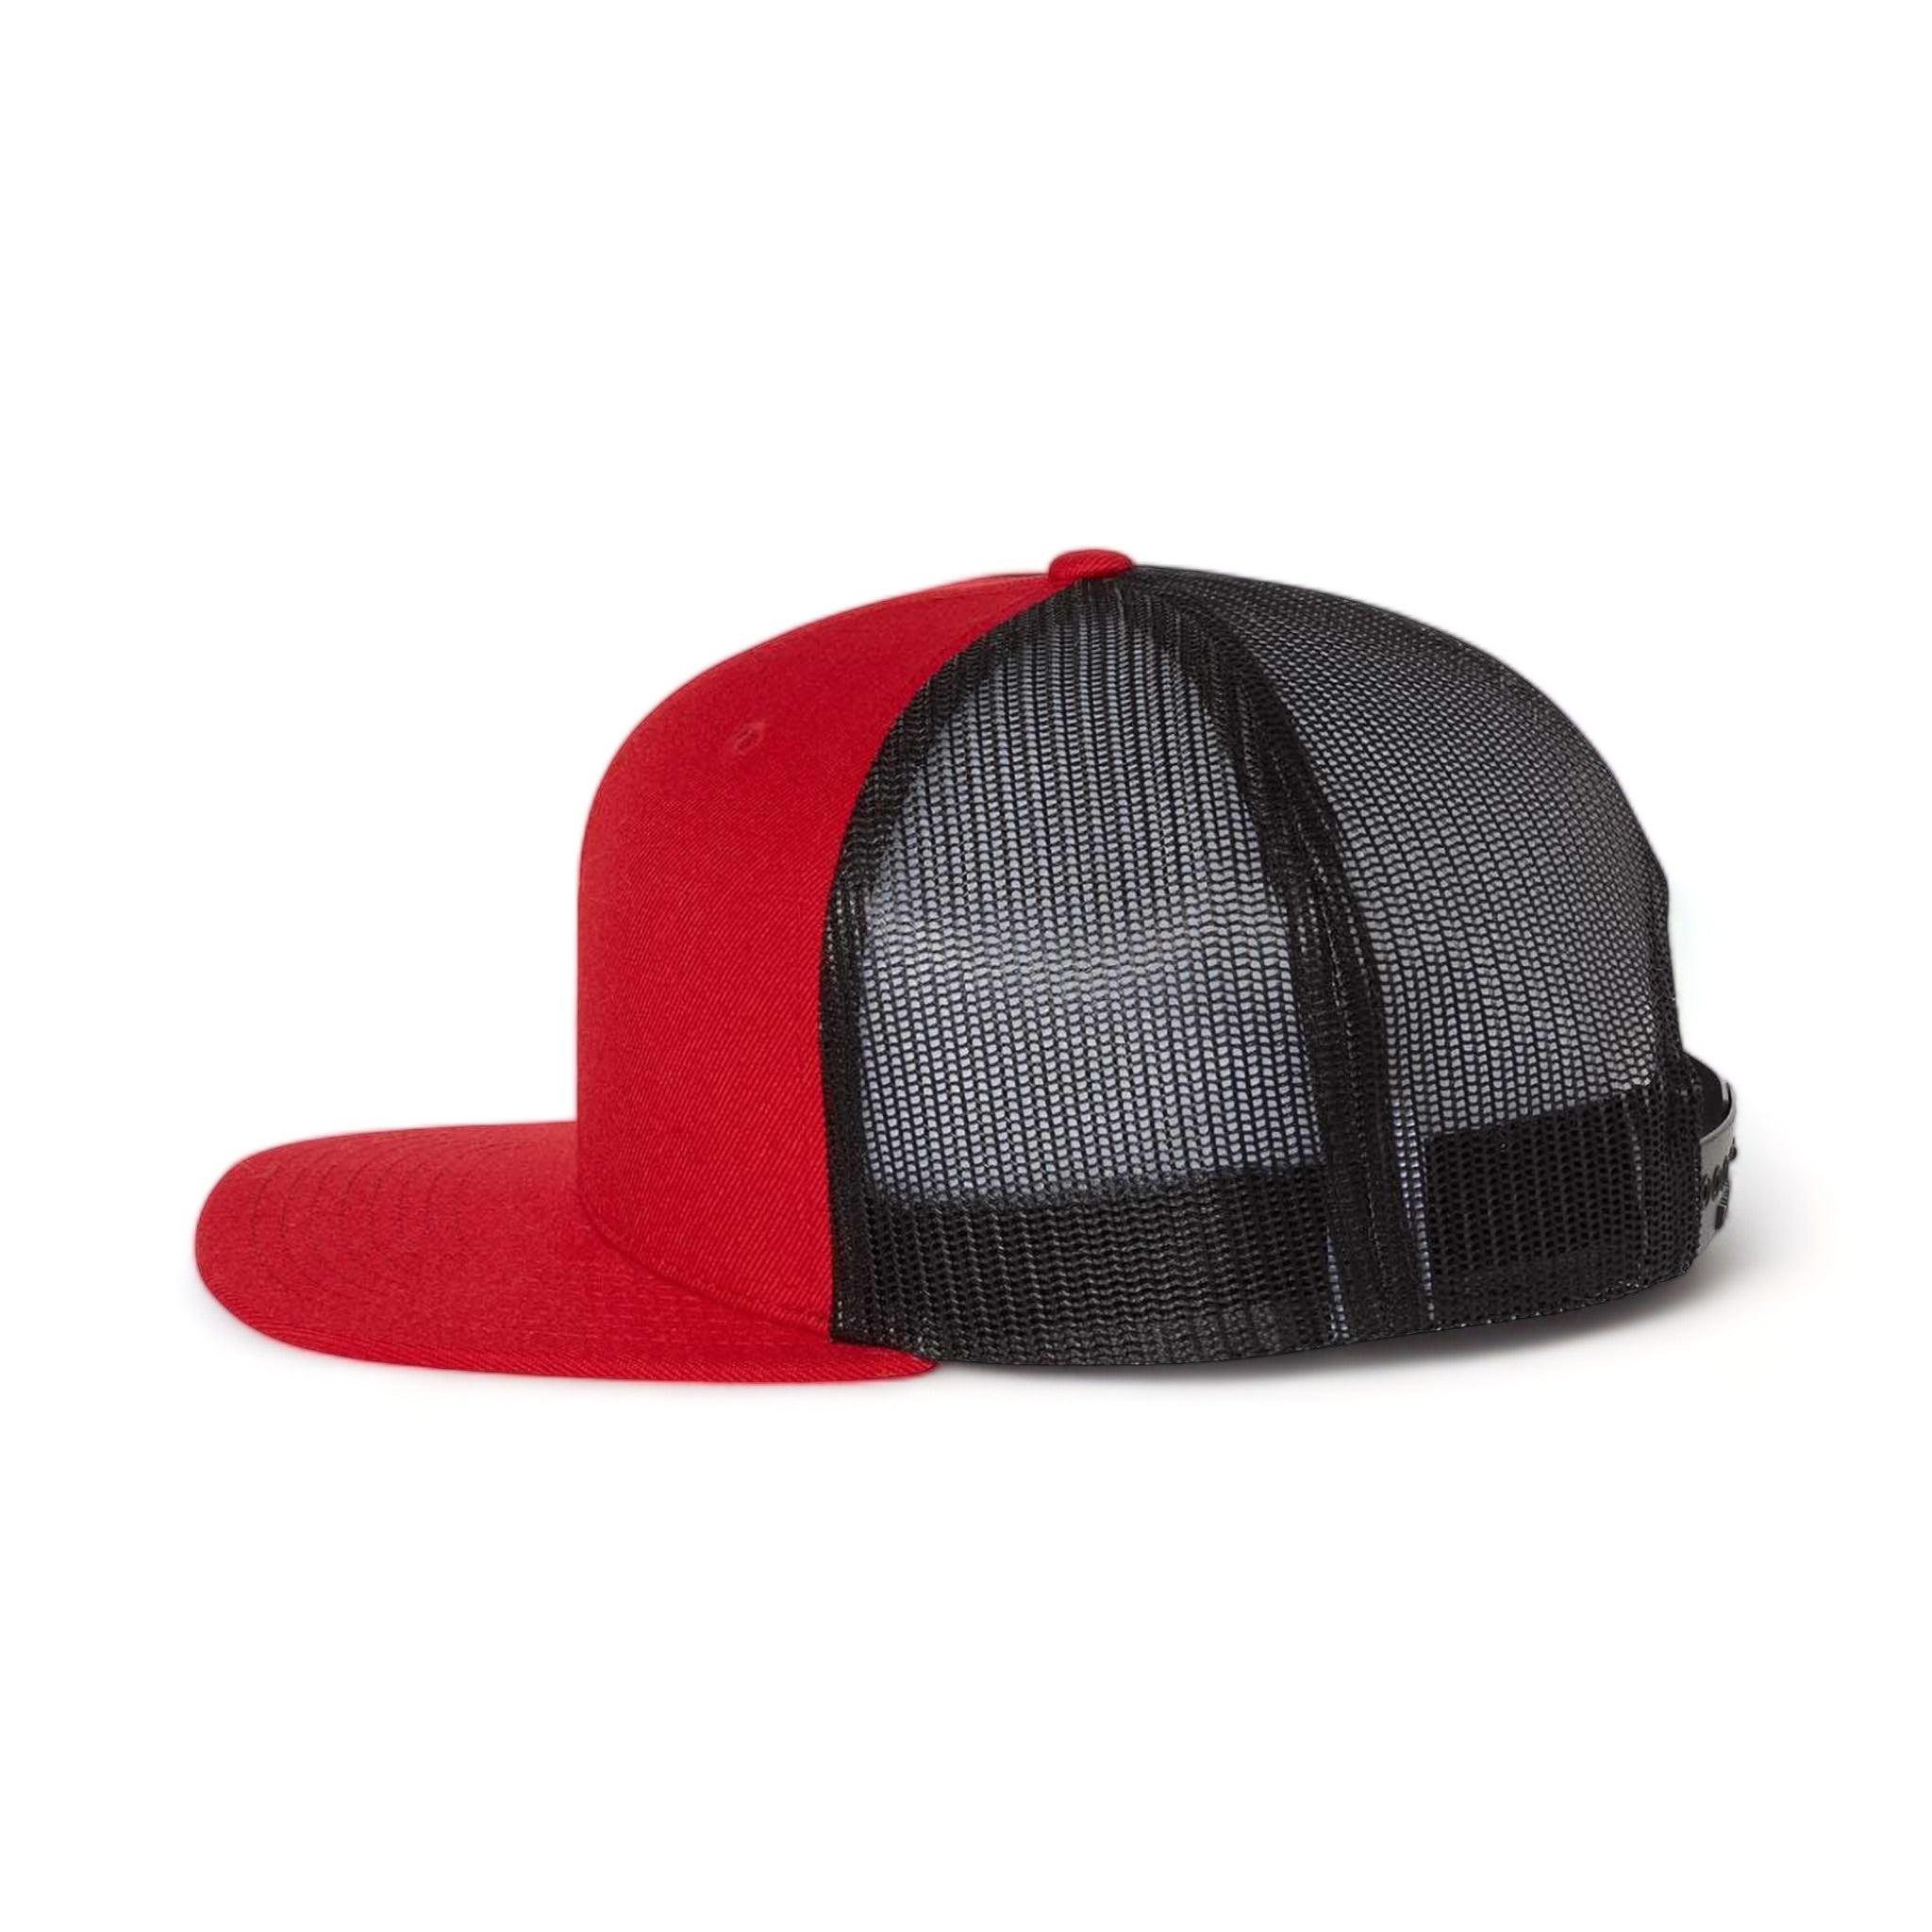 Side view of Richardson 511 custom hat in red and black